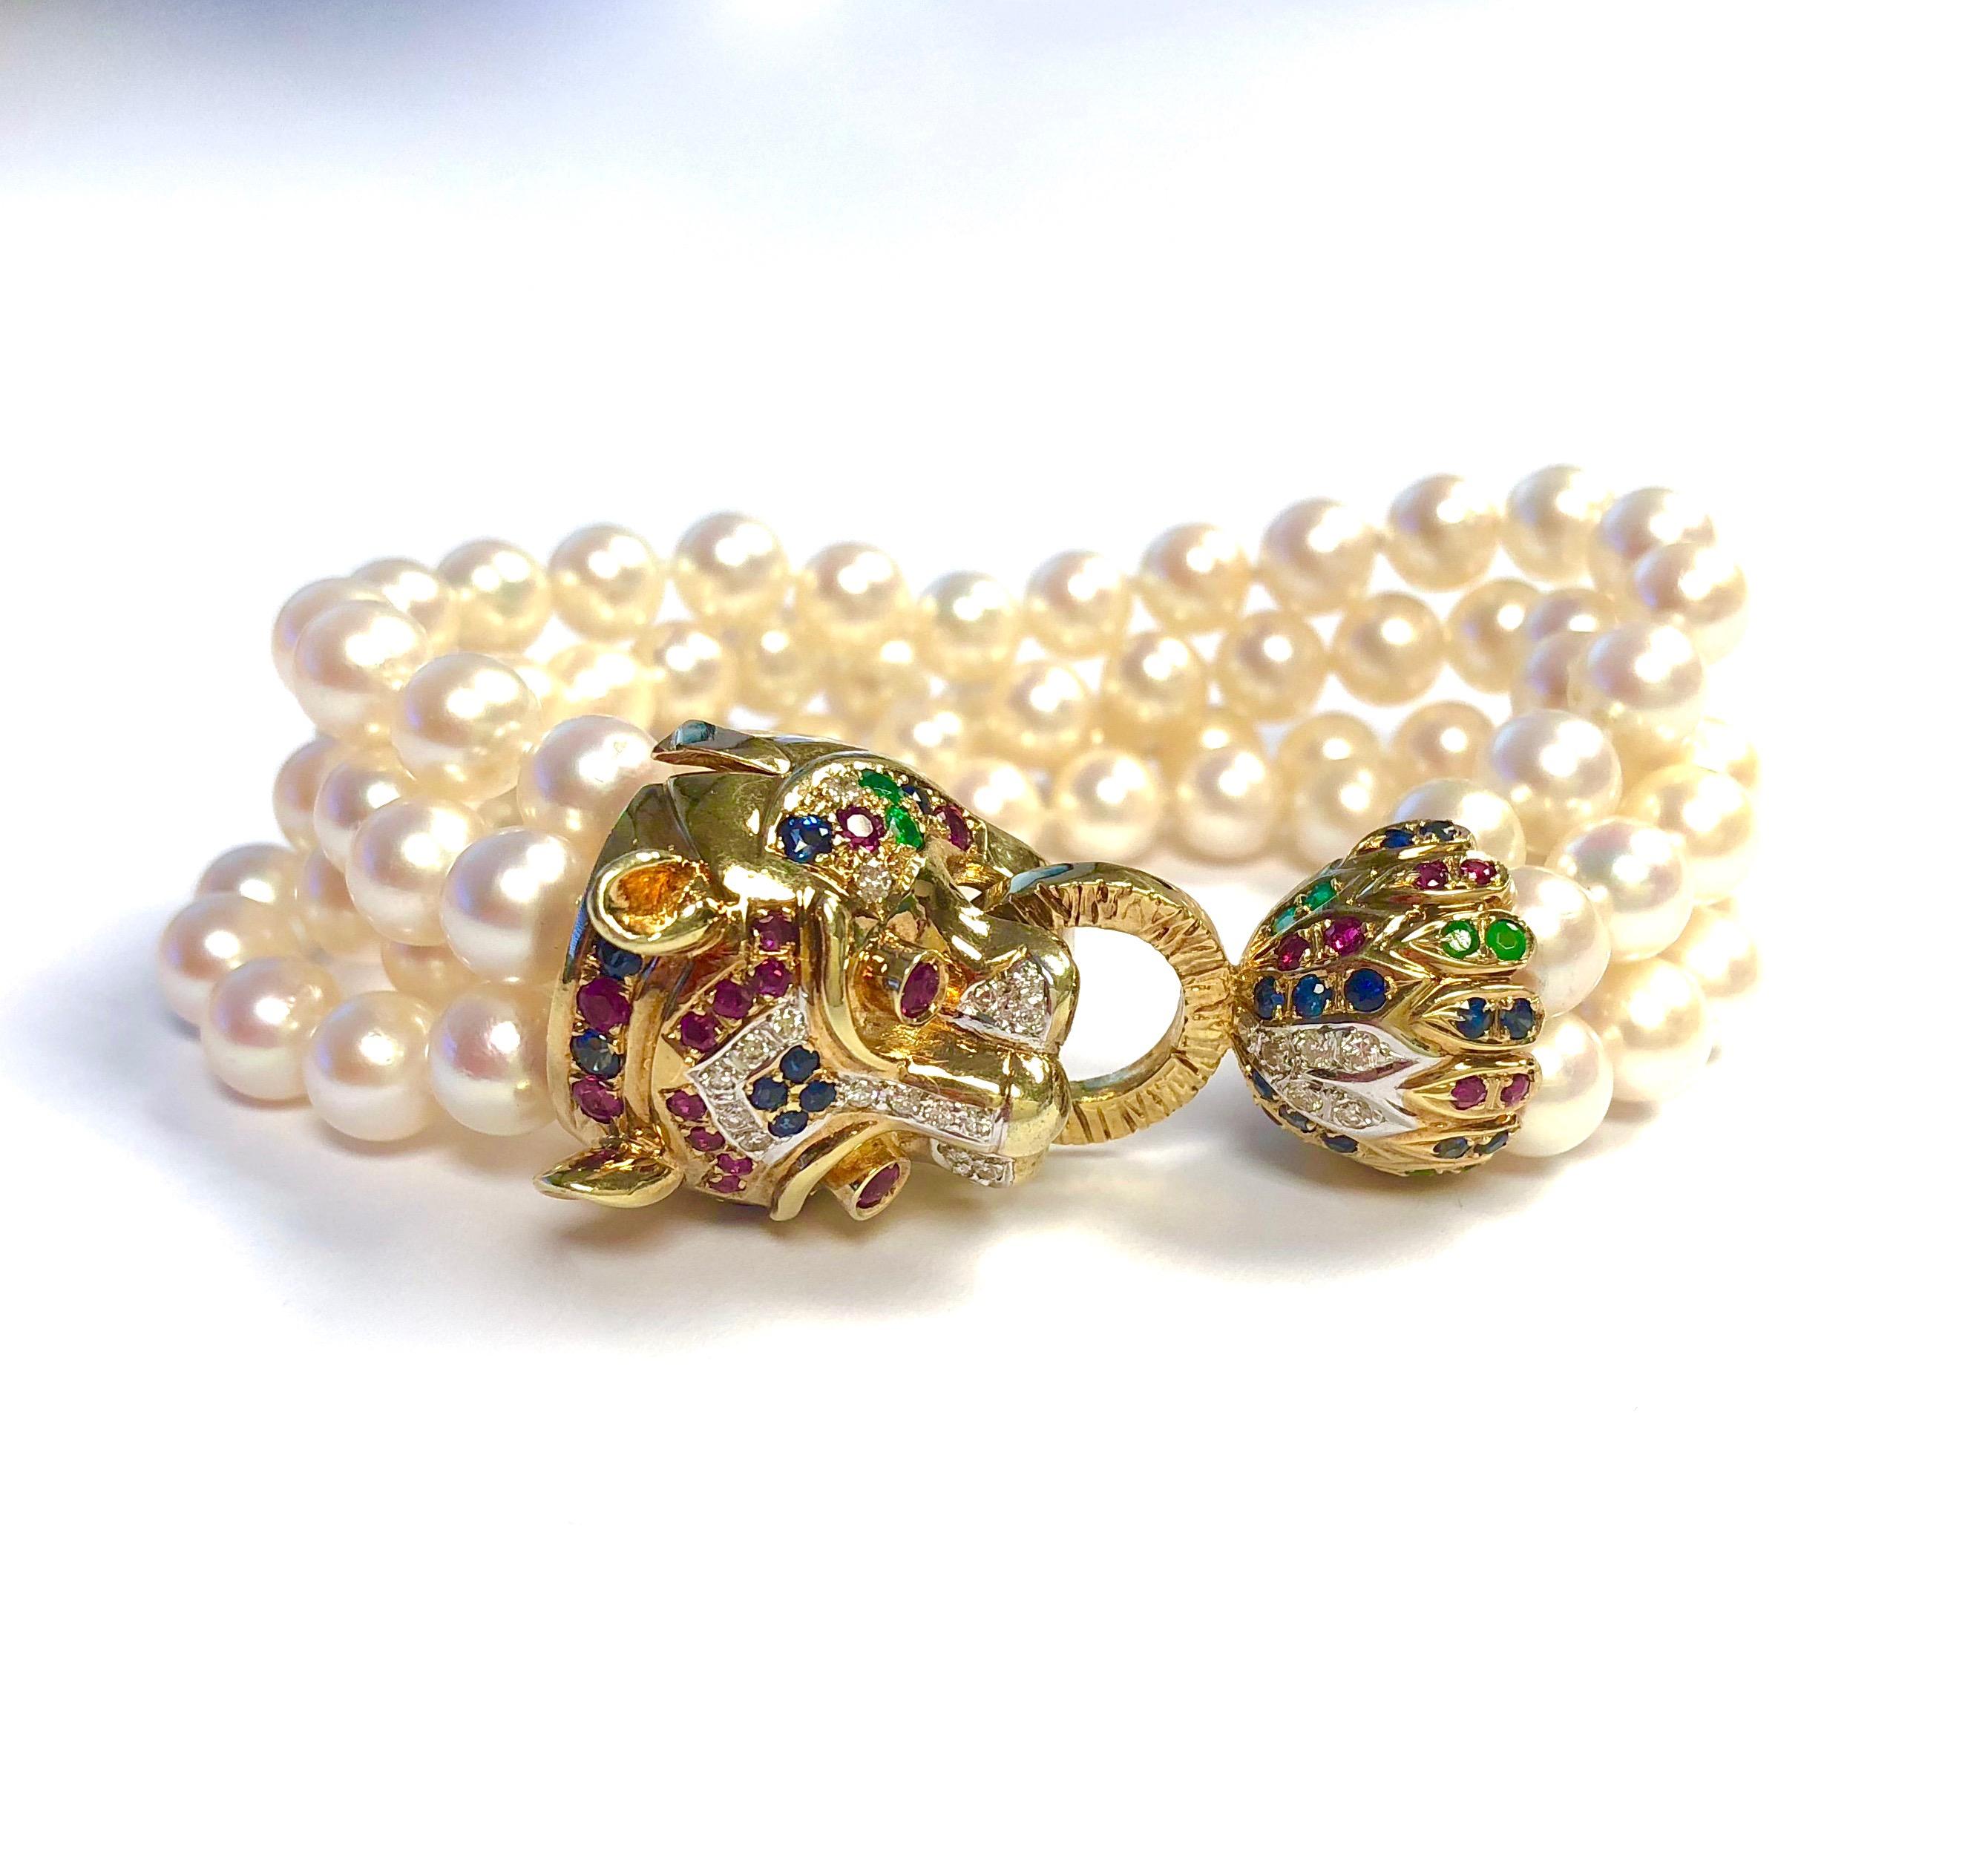 14K yellow gold panter clasp set with rubies, emeralds, sapphires and diamonds supported by four strands of 6.5mm to 7mm cultured Akoya pearls. The pearls have a high luster with rose over tone. 
24 round brilliant cut diamonds, approcimate total